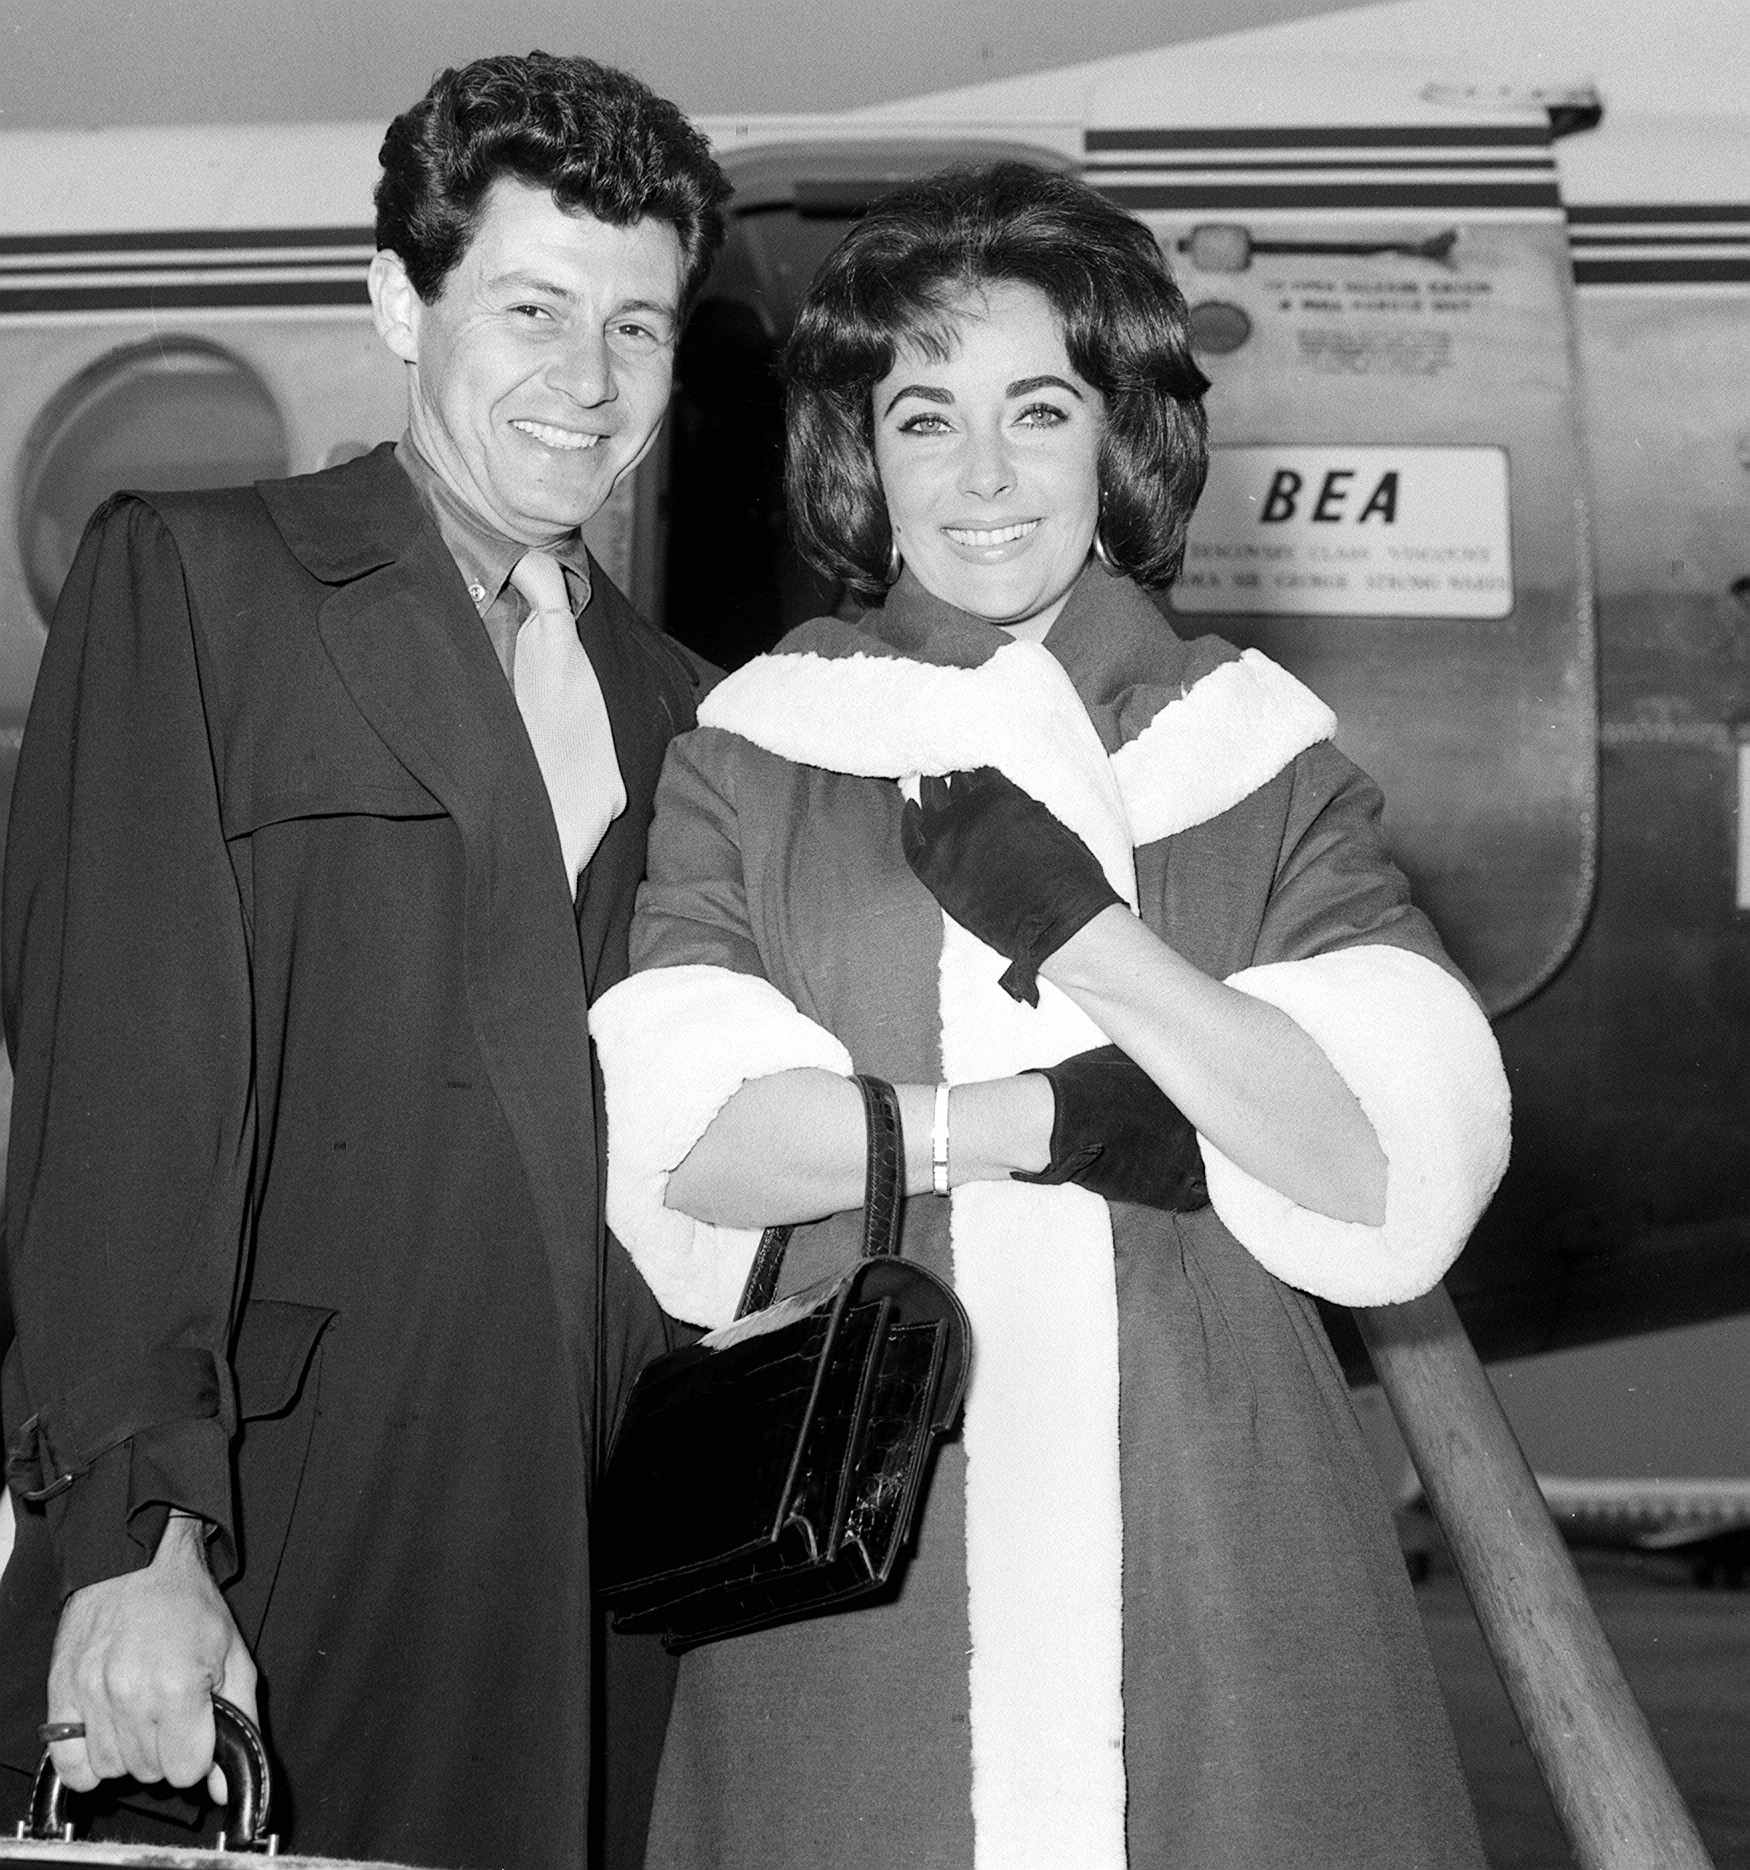 Perhaps the most prominent of Elizabeth's relationships was her fourth husband, Eddie Fisher